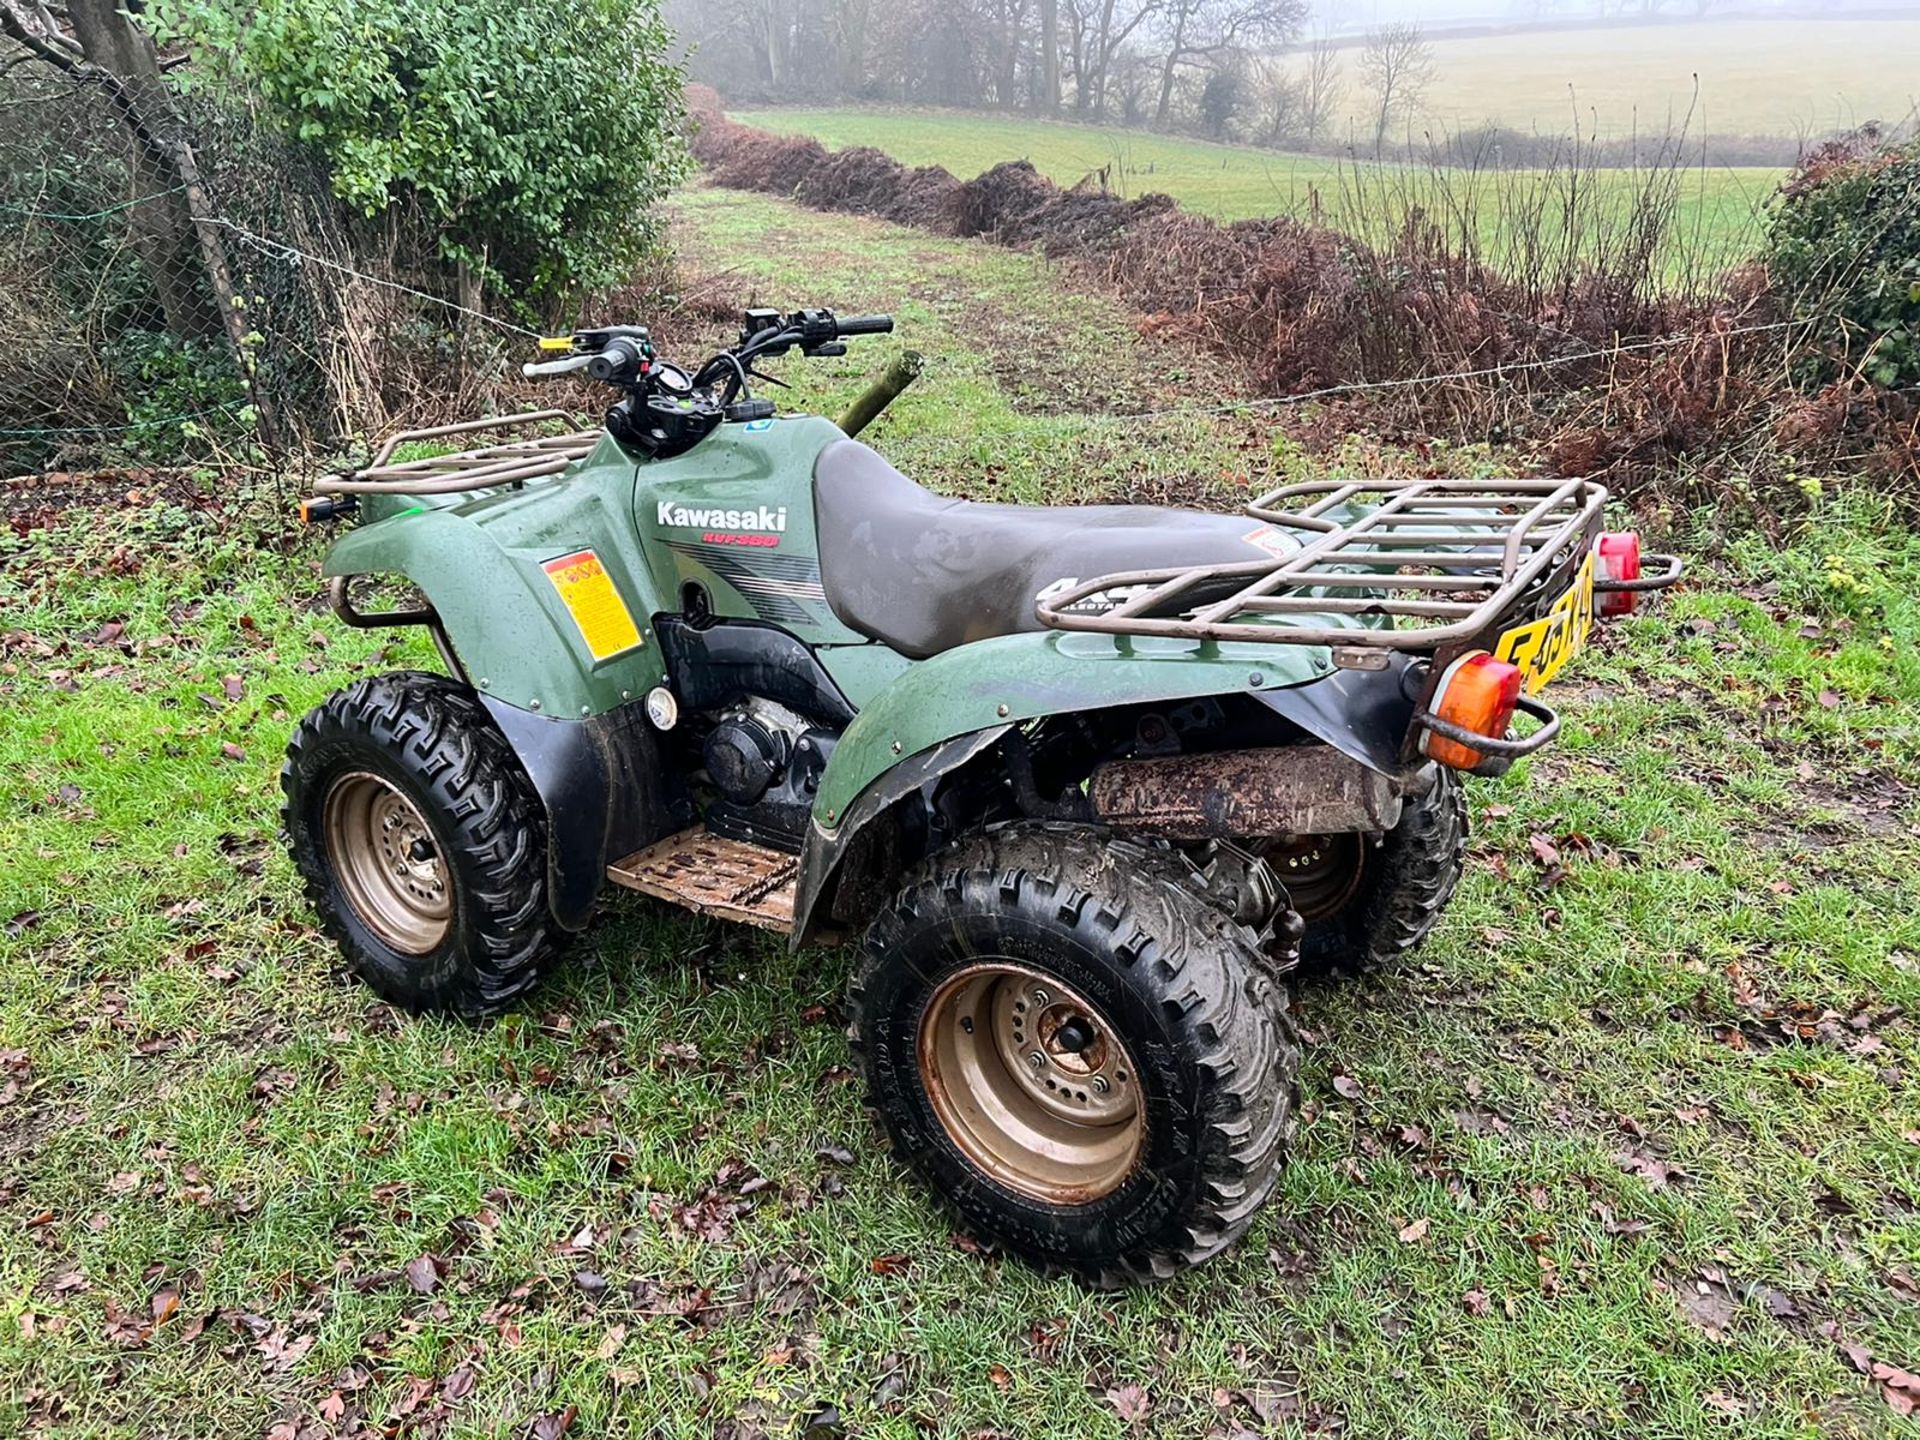 KAWASAKI KVF360 4WD FARM QUAD BIKE, RUNS AND DRIVES WELL, SHOWING A LOW 3438 HOURS PLUS VAT* - Image 5 of 13